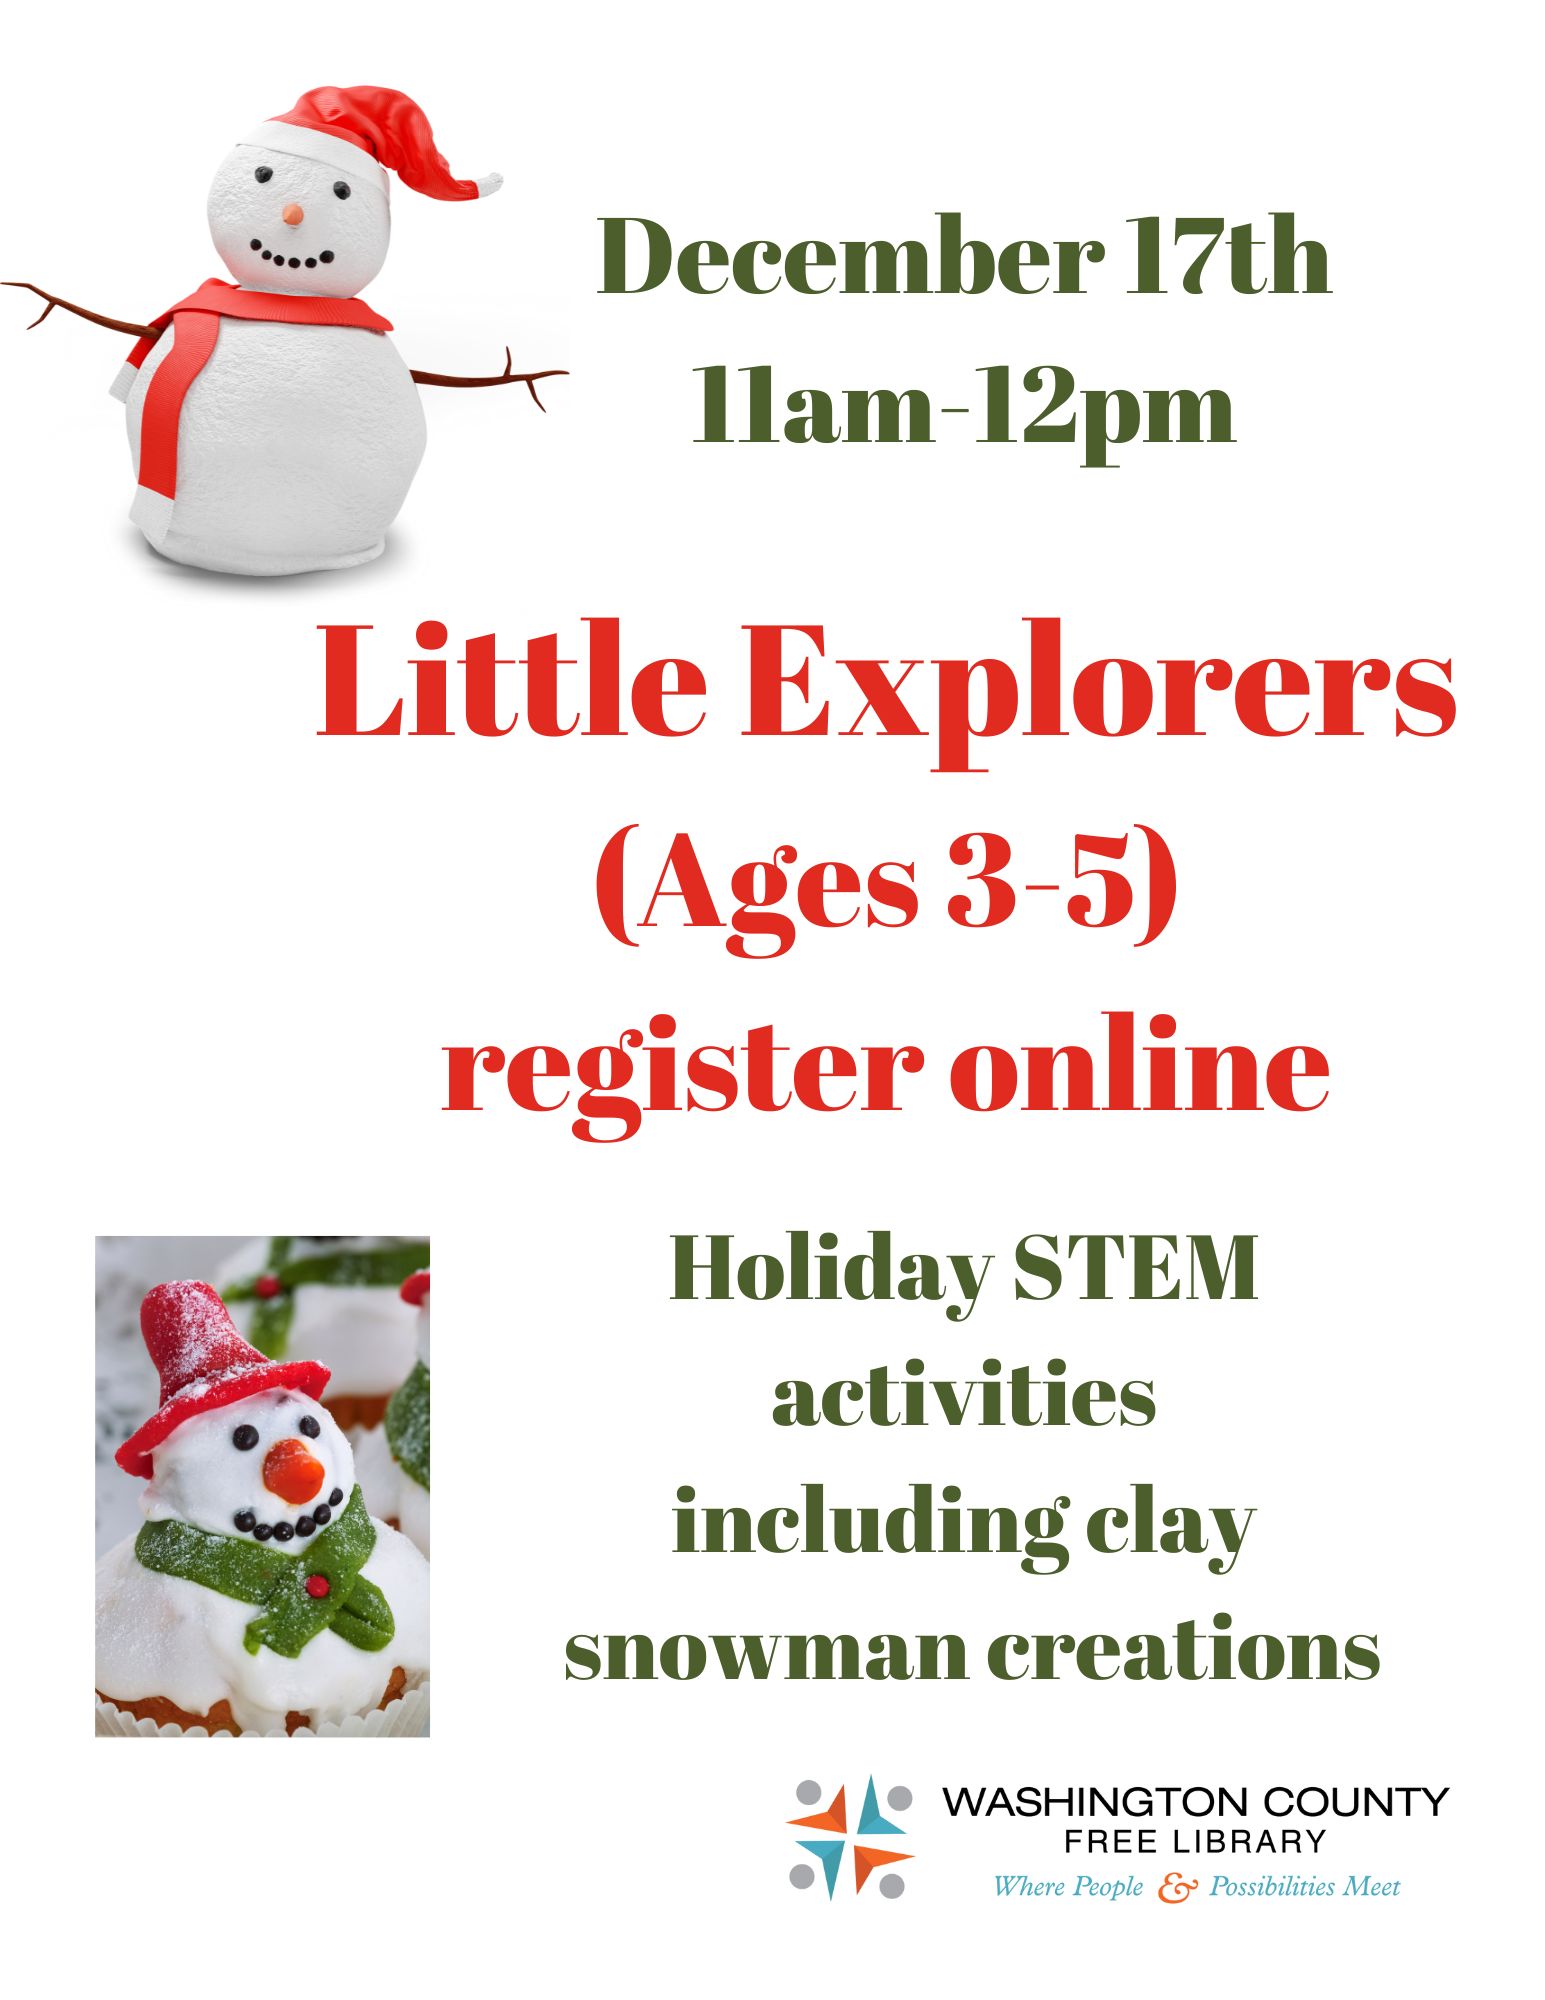 Kids Discover: Holiday STEM activities